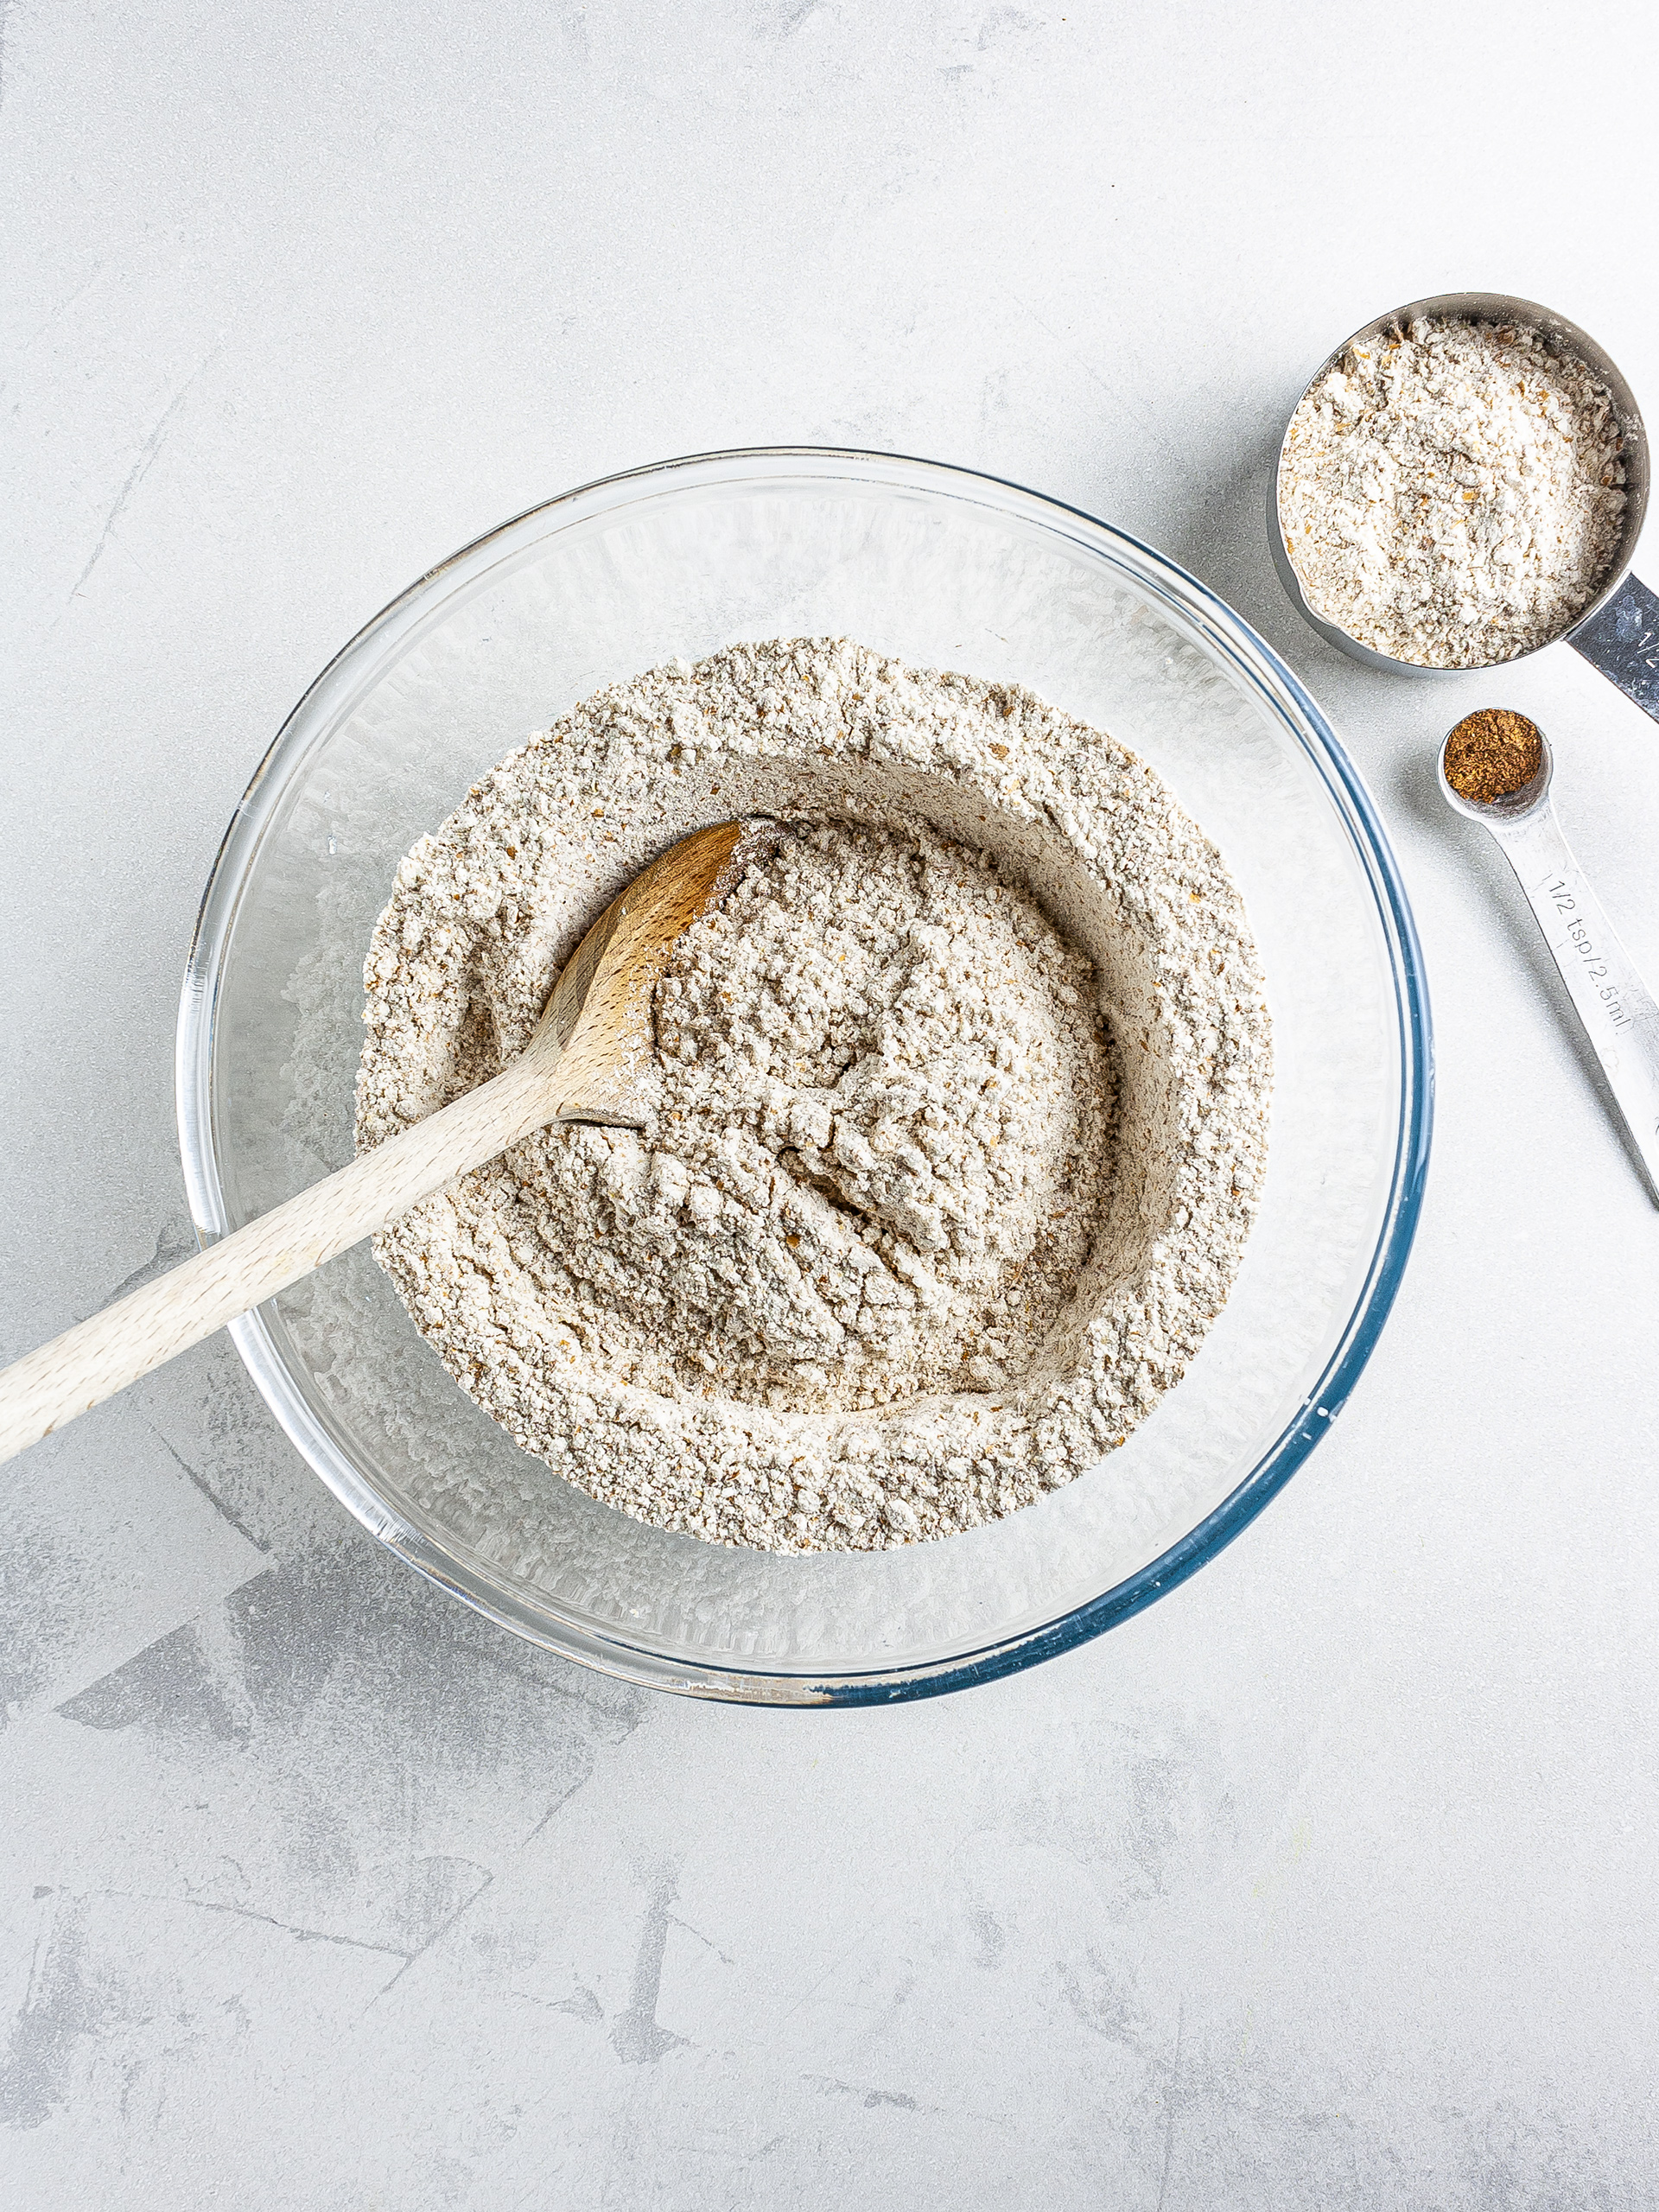 Wholemeal flour, nutmeg and baking powder in a bowl